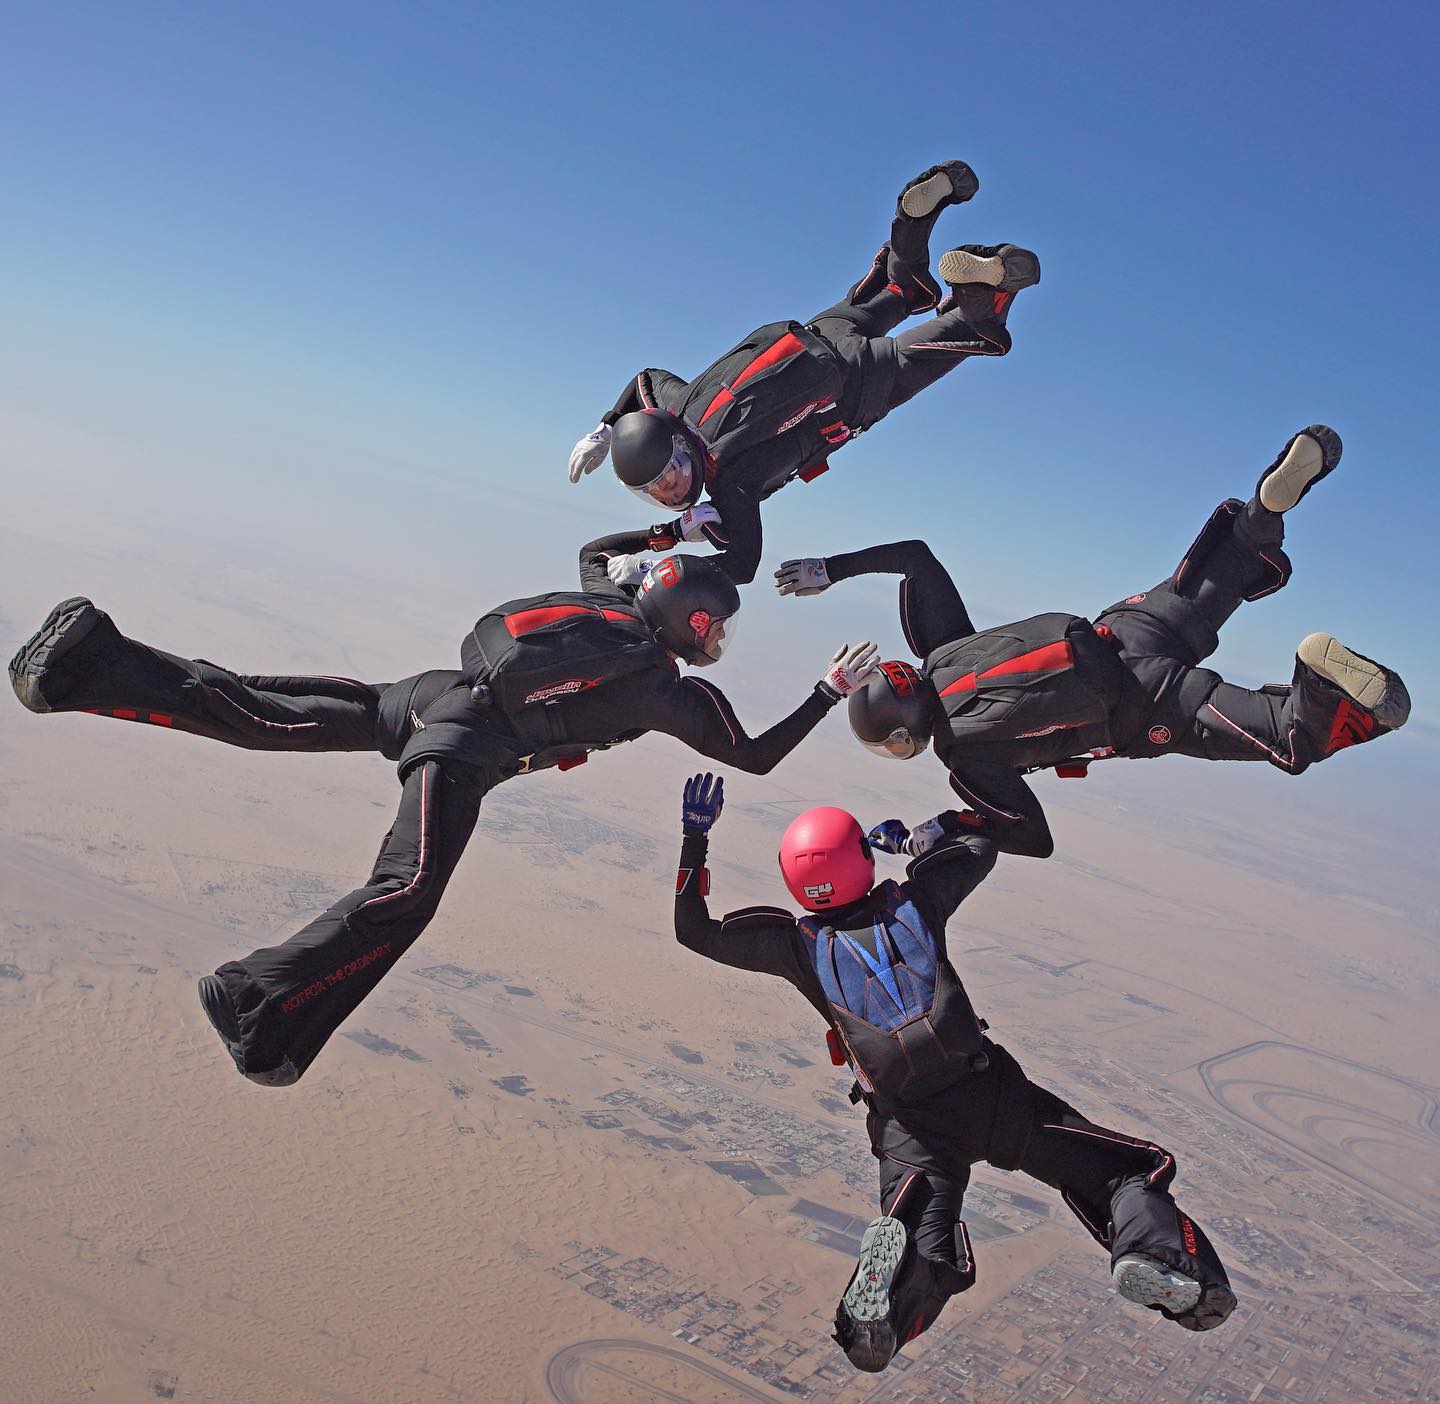 Skydiving – USA, October 2022